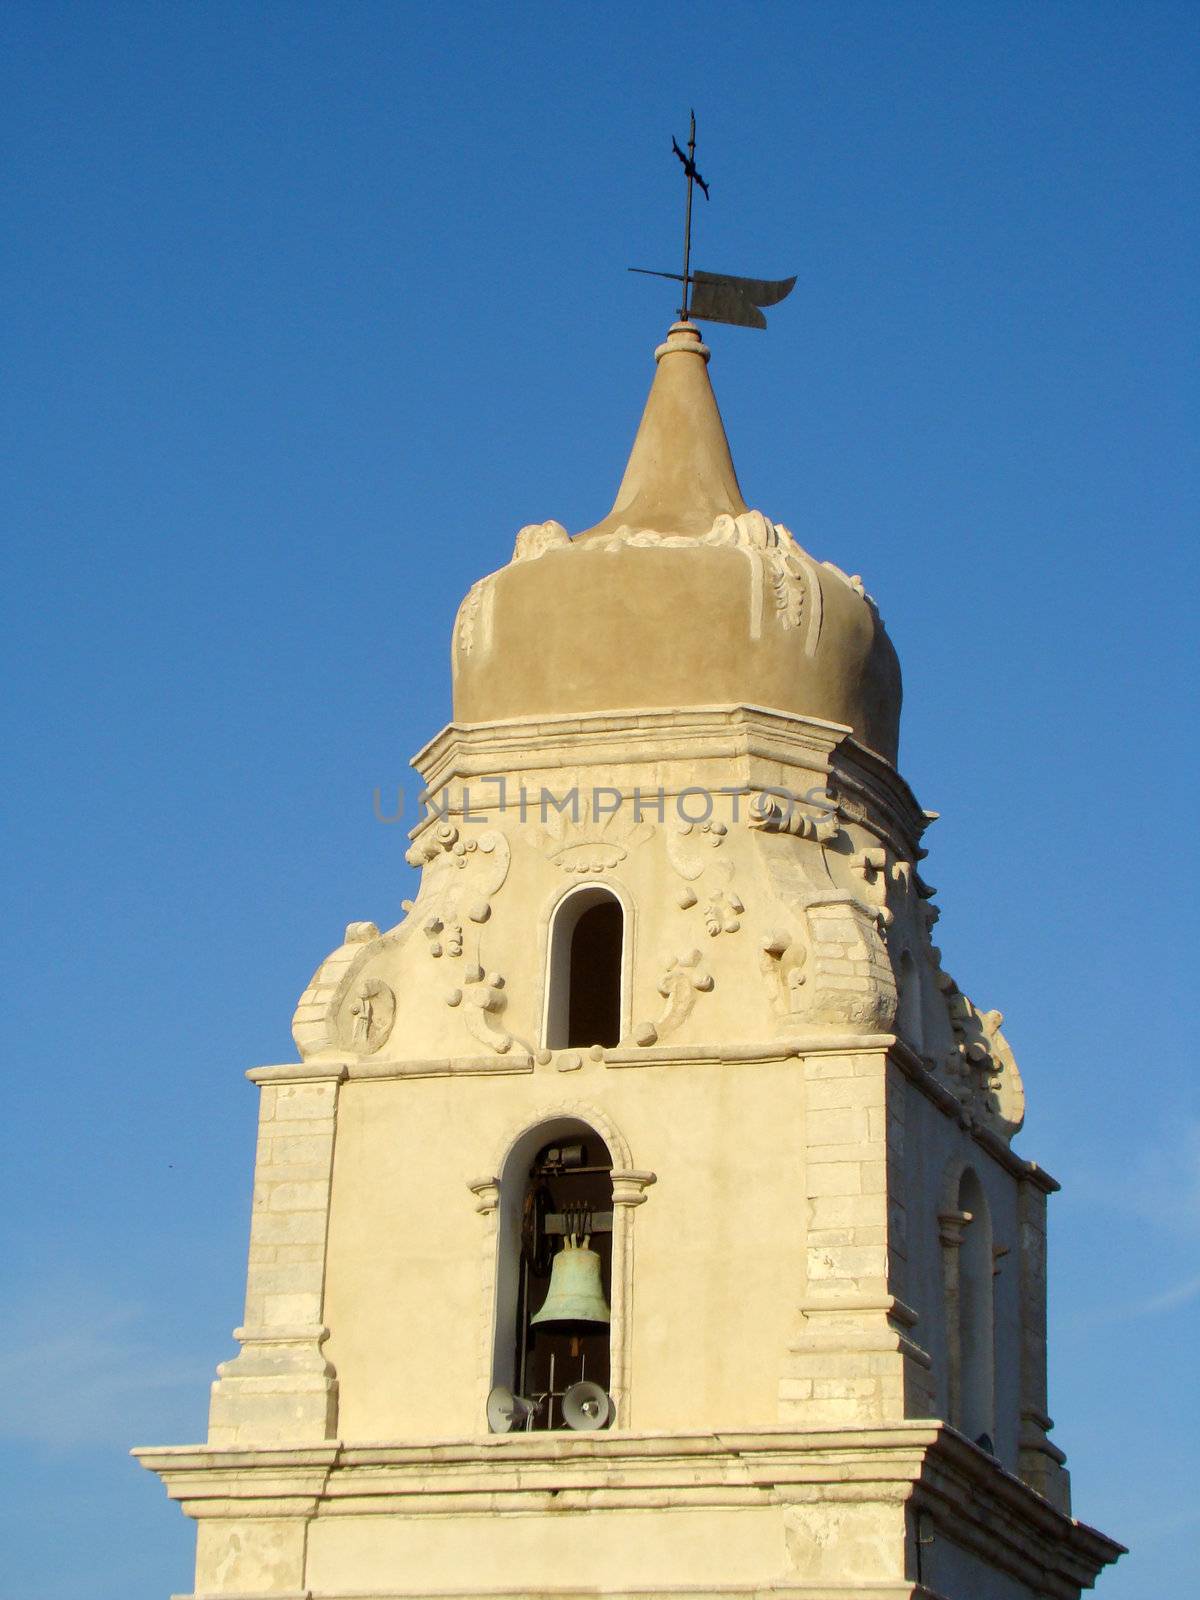 Bell Tower In Vieste
Bell tower of church in Vieste touristic capital of Gargano region in Apulia in Italy. 2007 